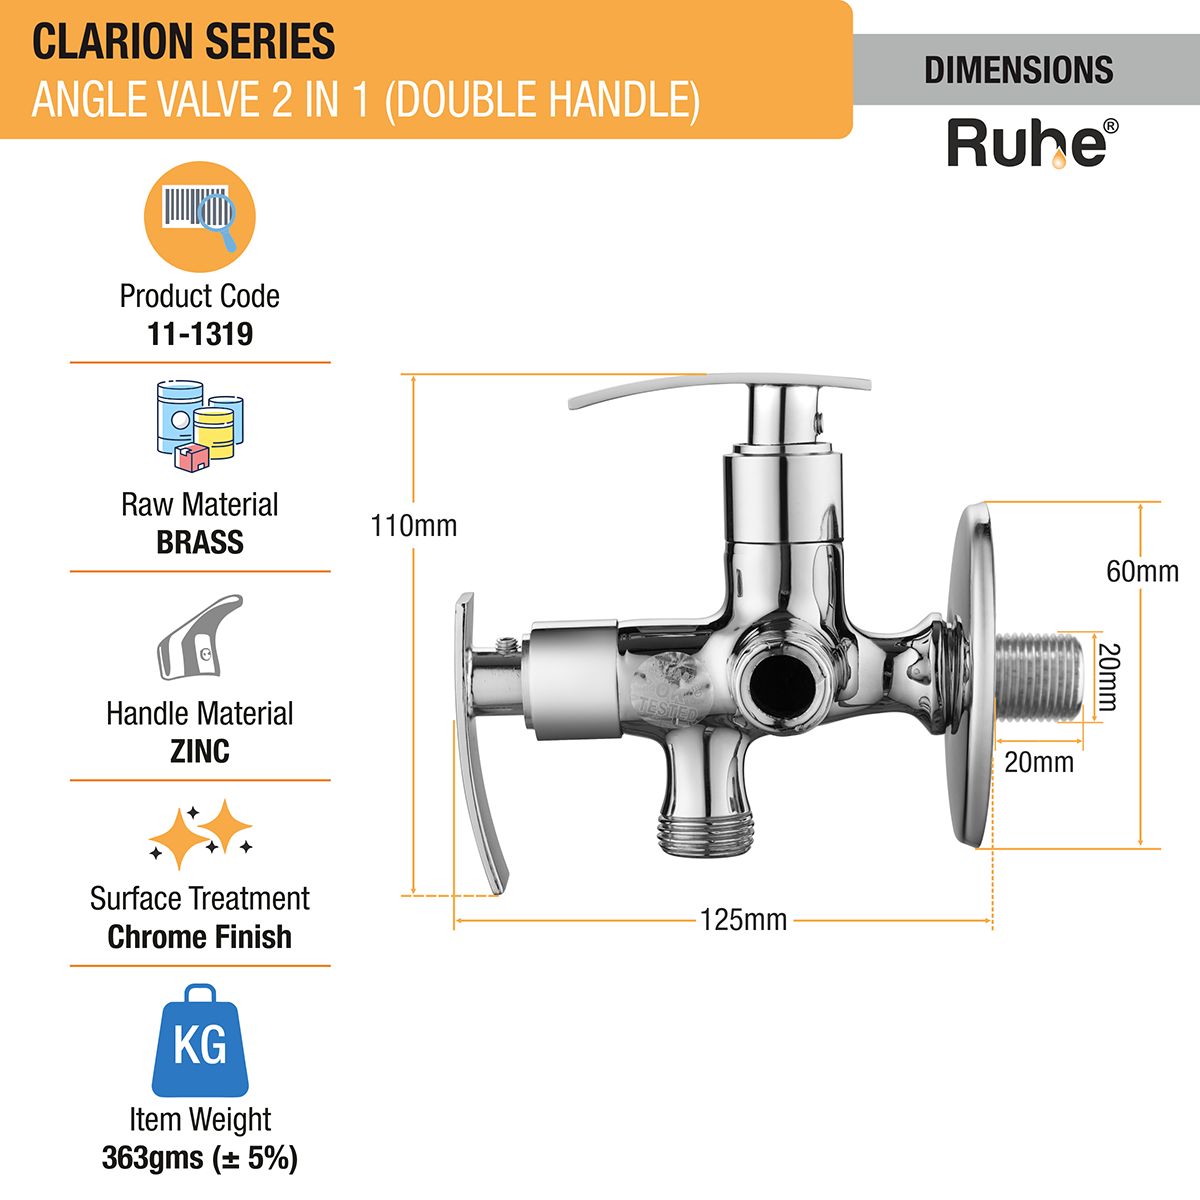 Clarion Two Way Angle Valve Brass Faucet (Double Handle) dimensions and size